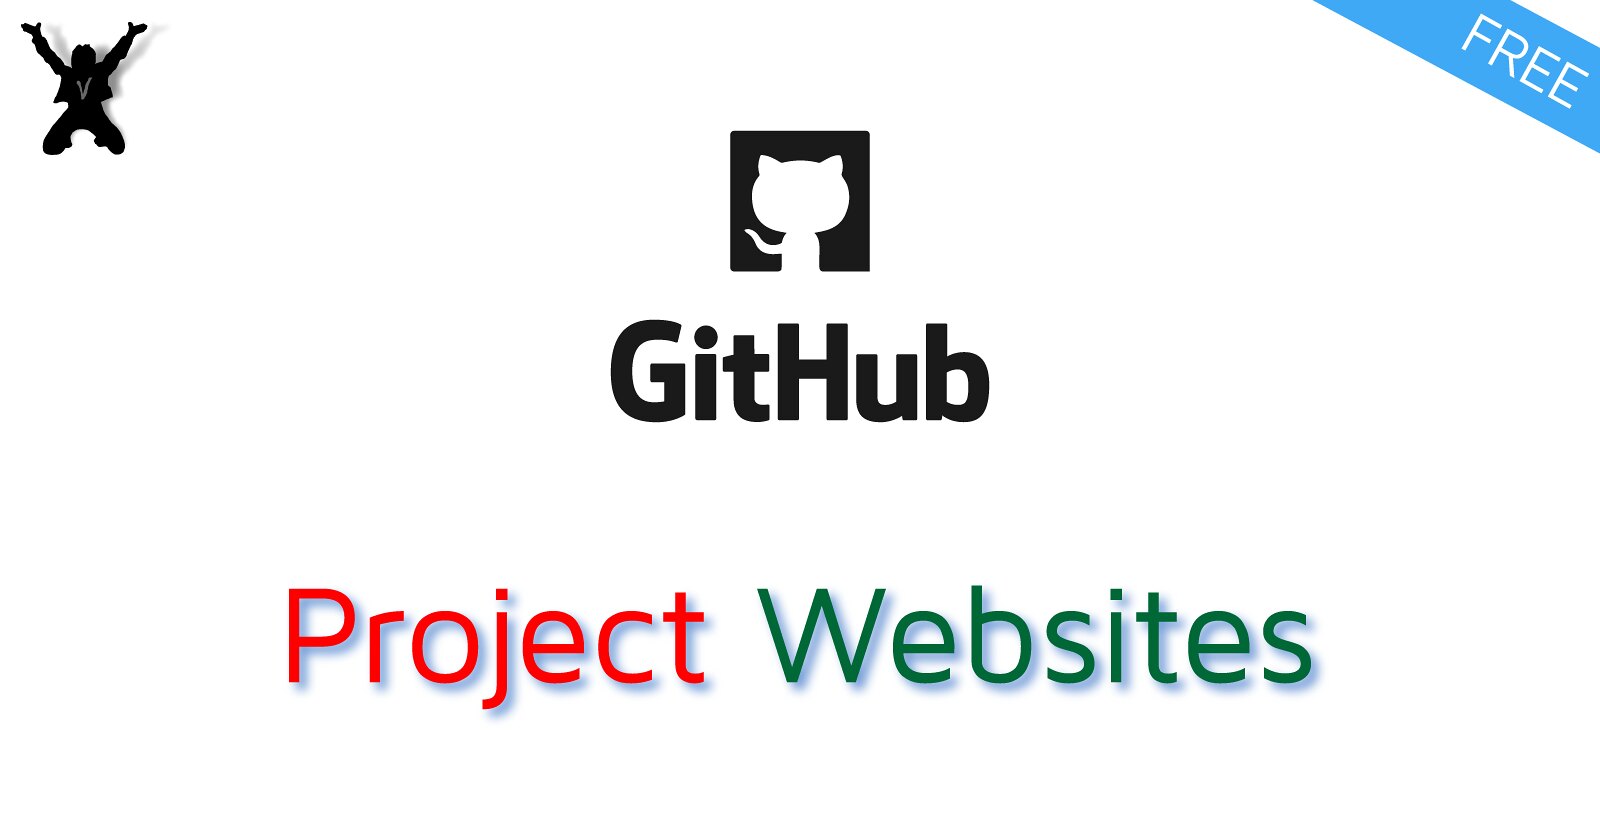 How to publish Project Websites on GitHub